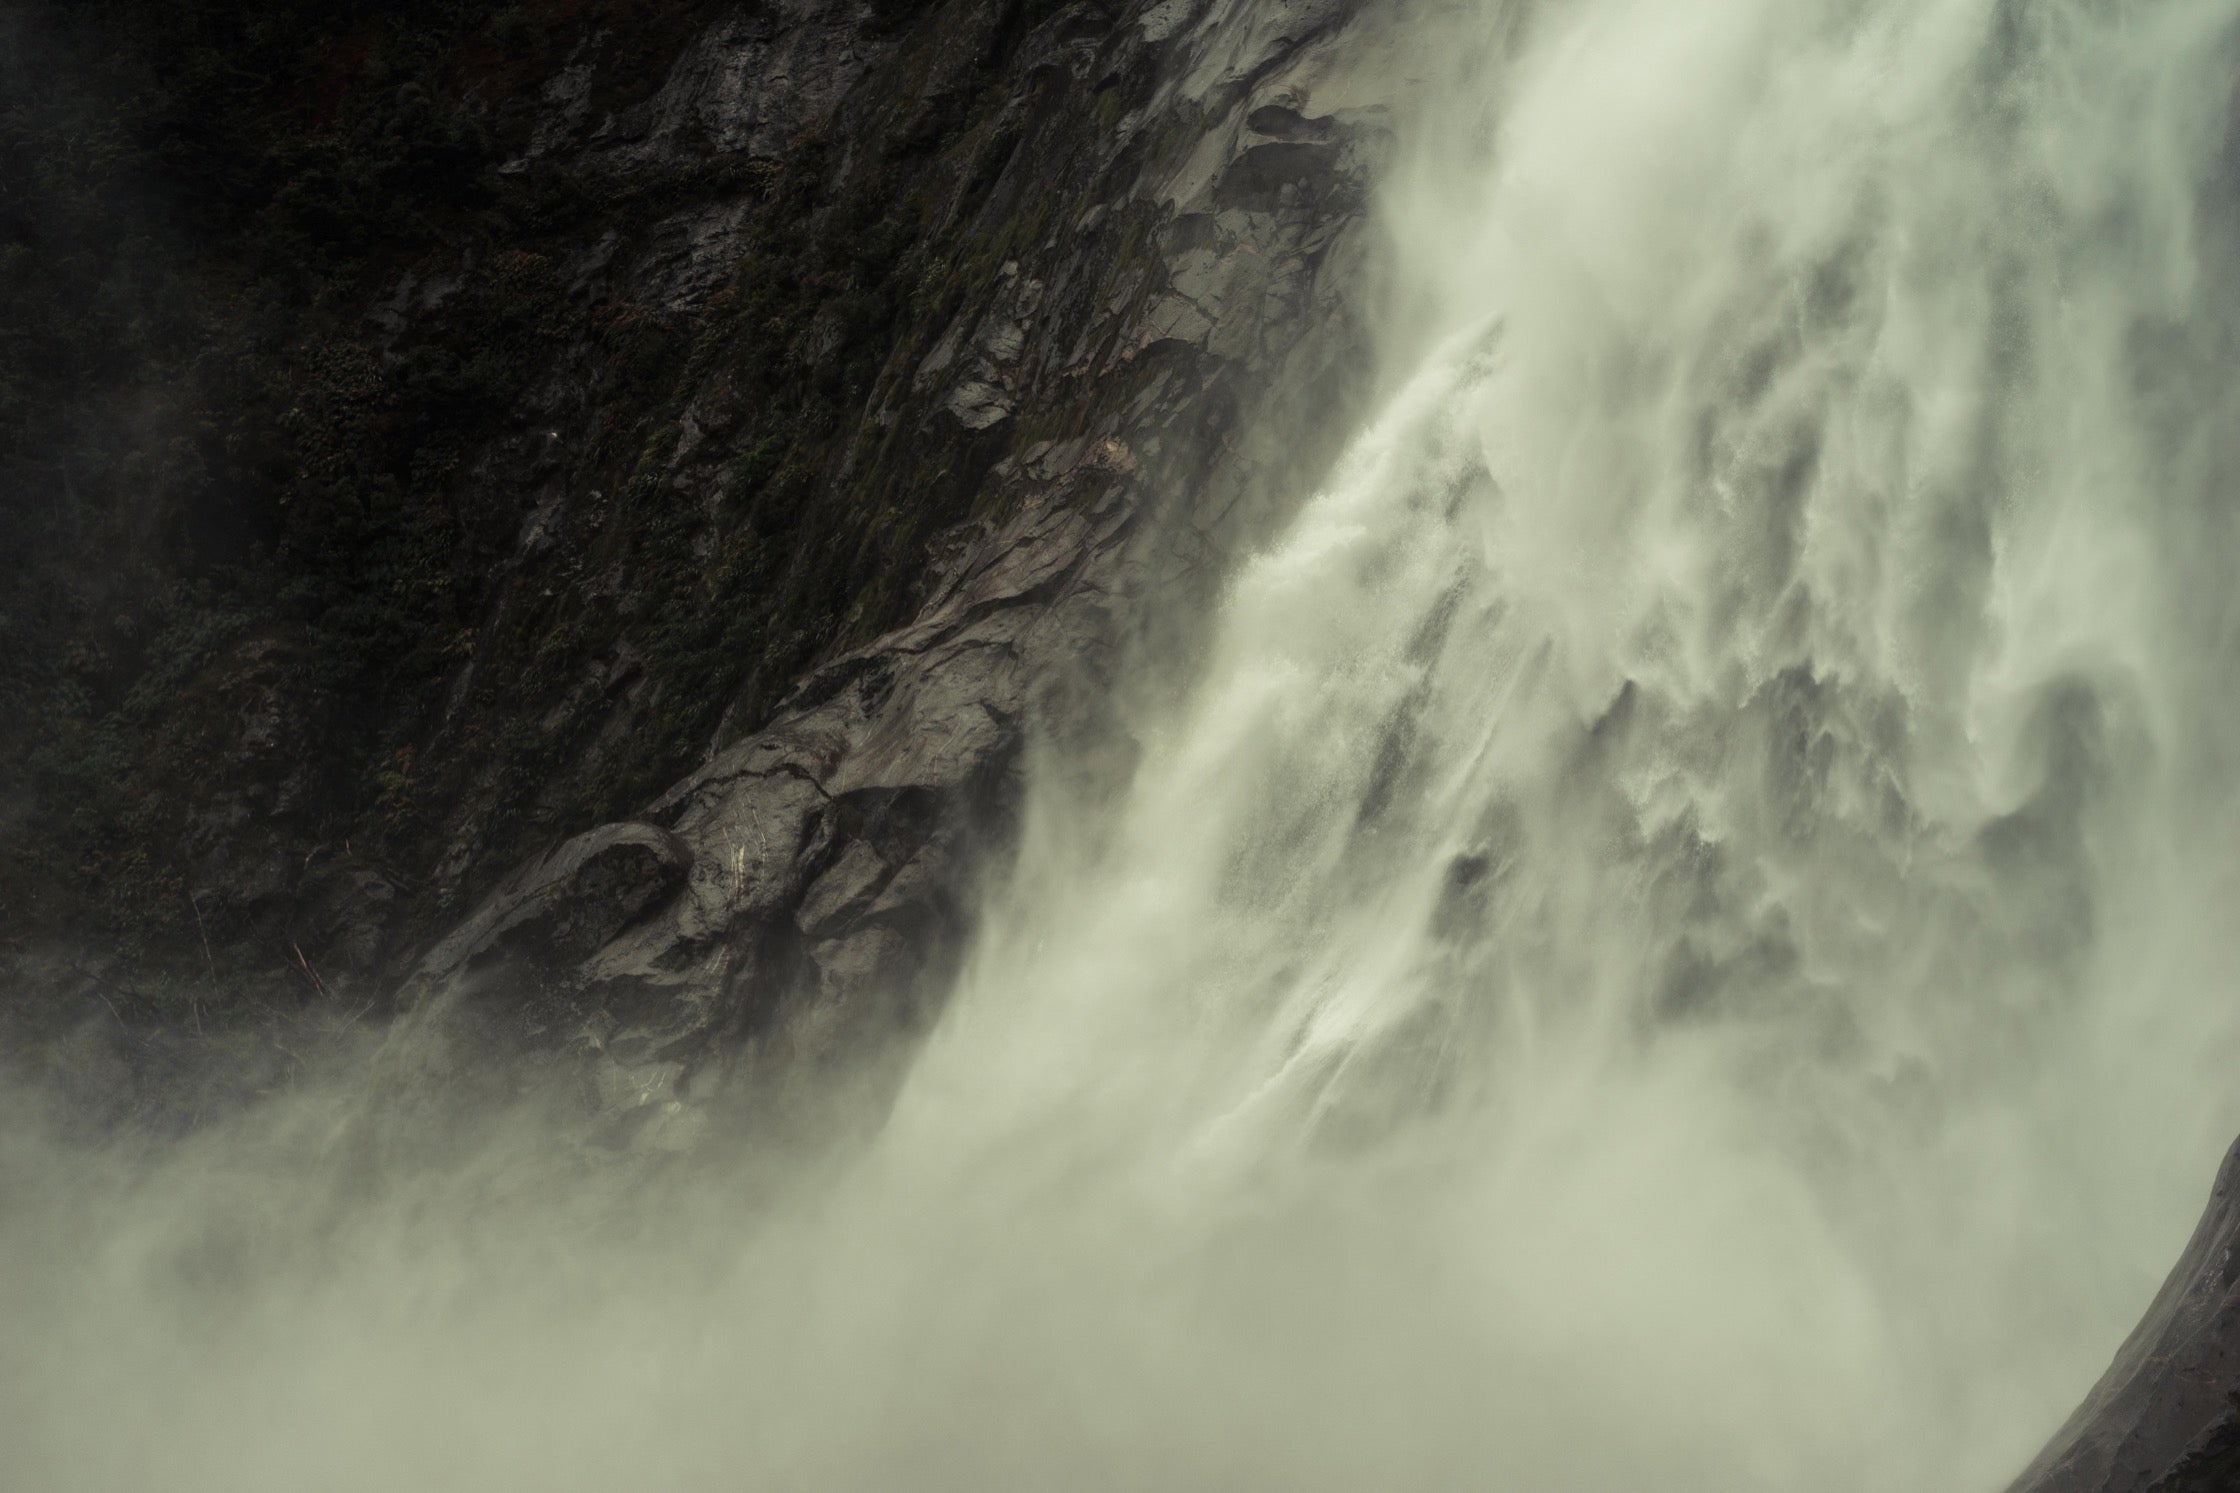 Close-up view of the waterfall at Milford Sound.